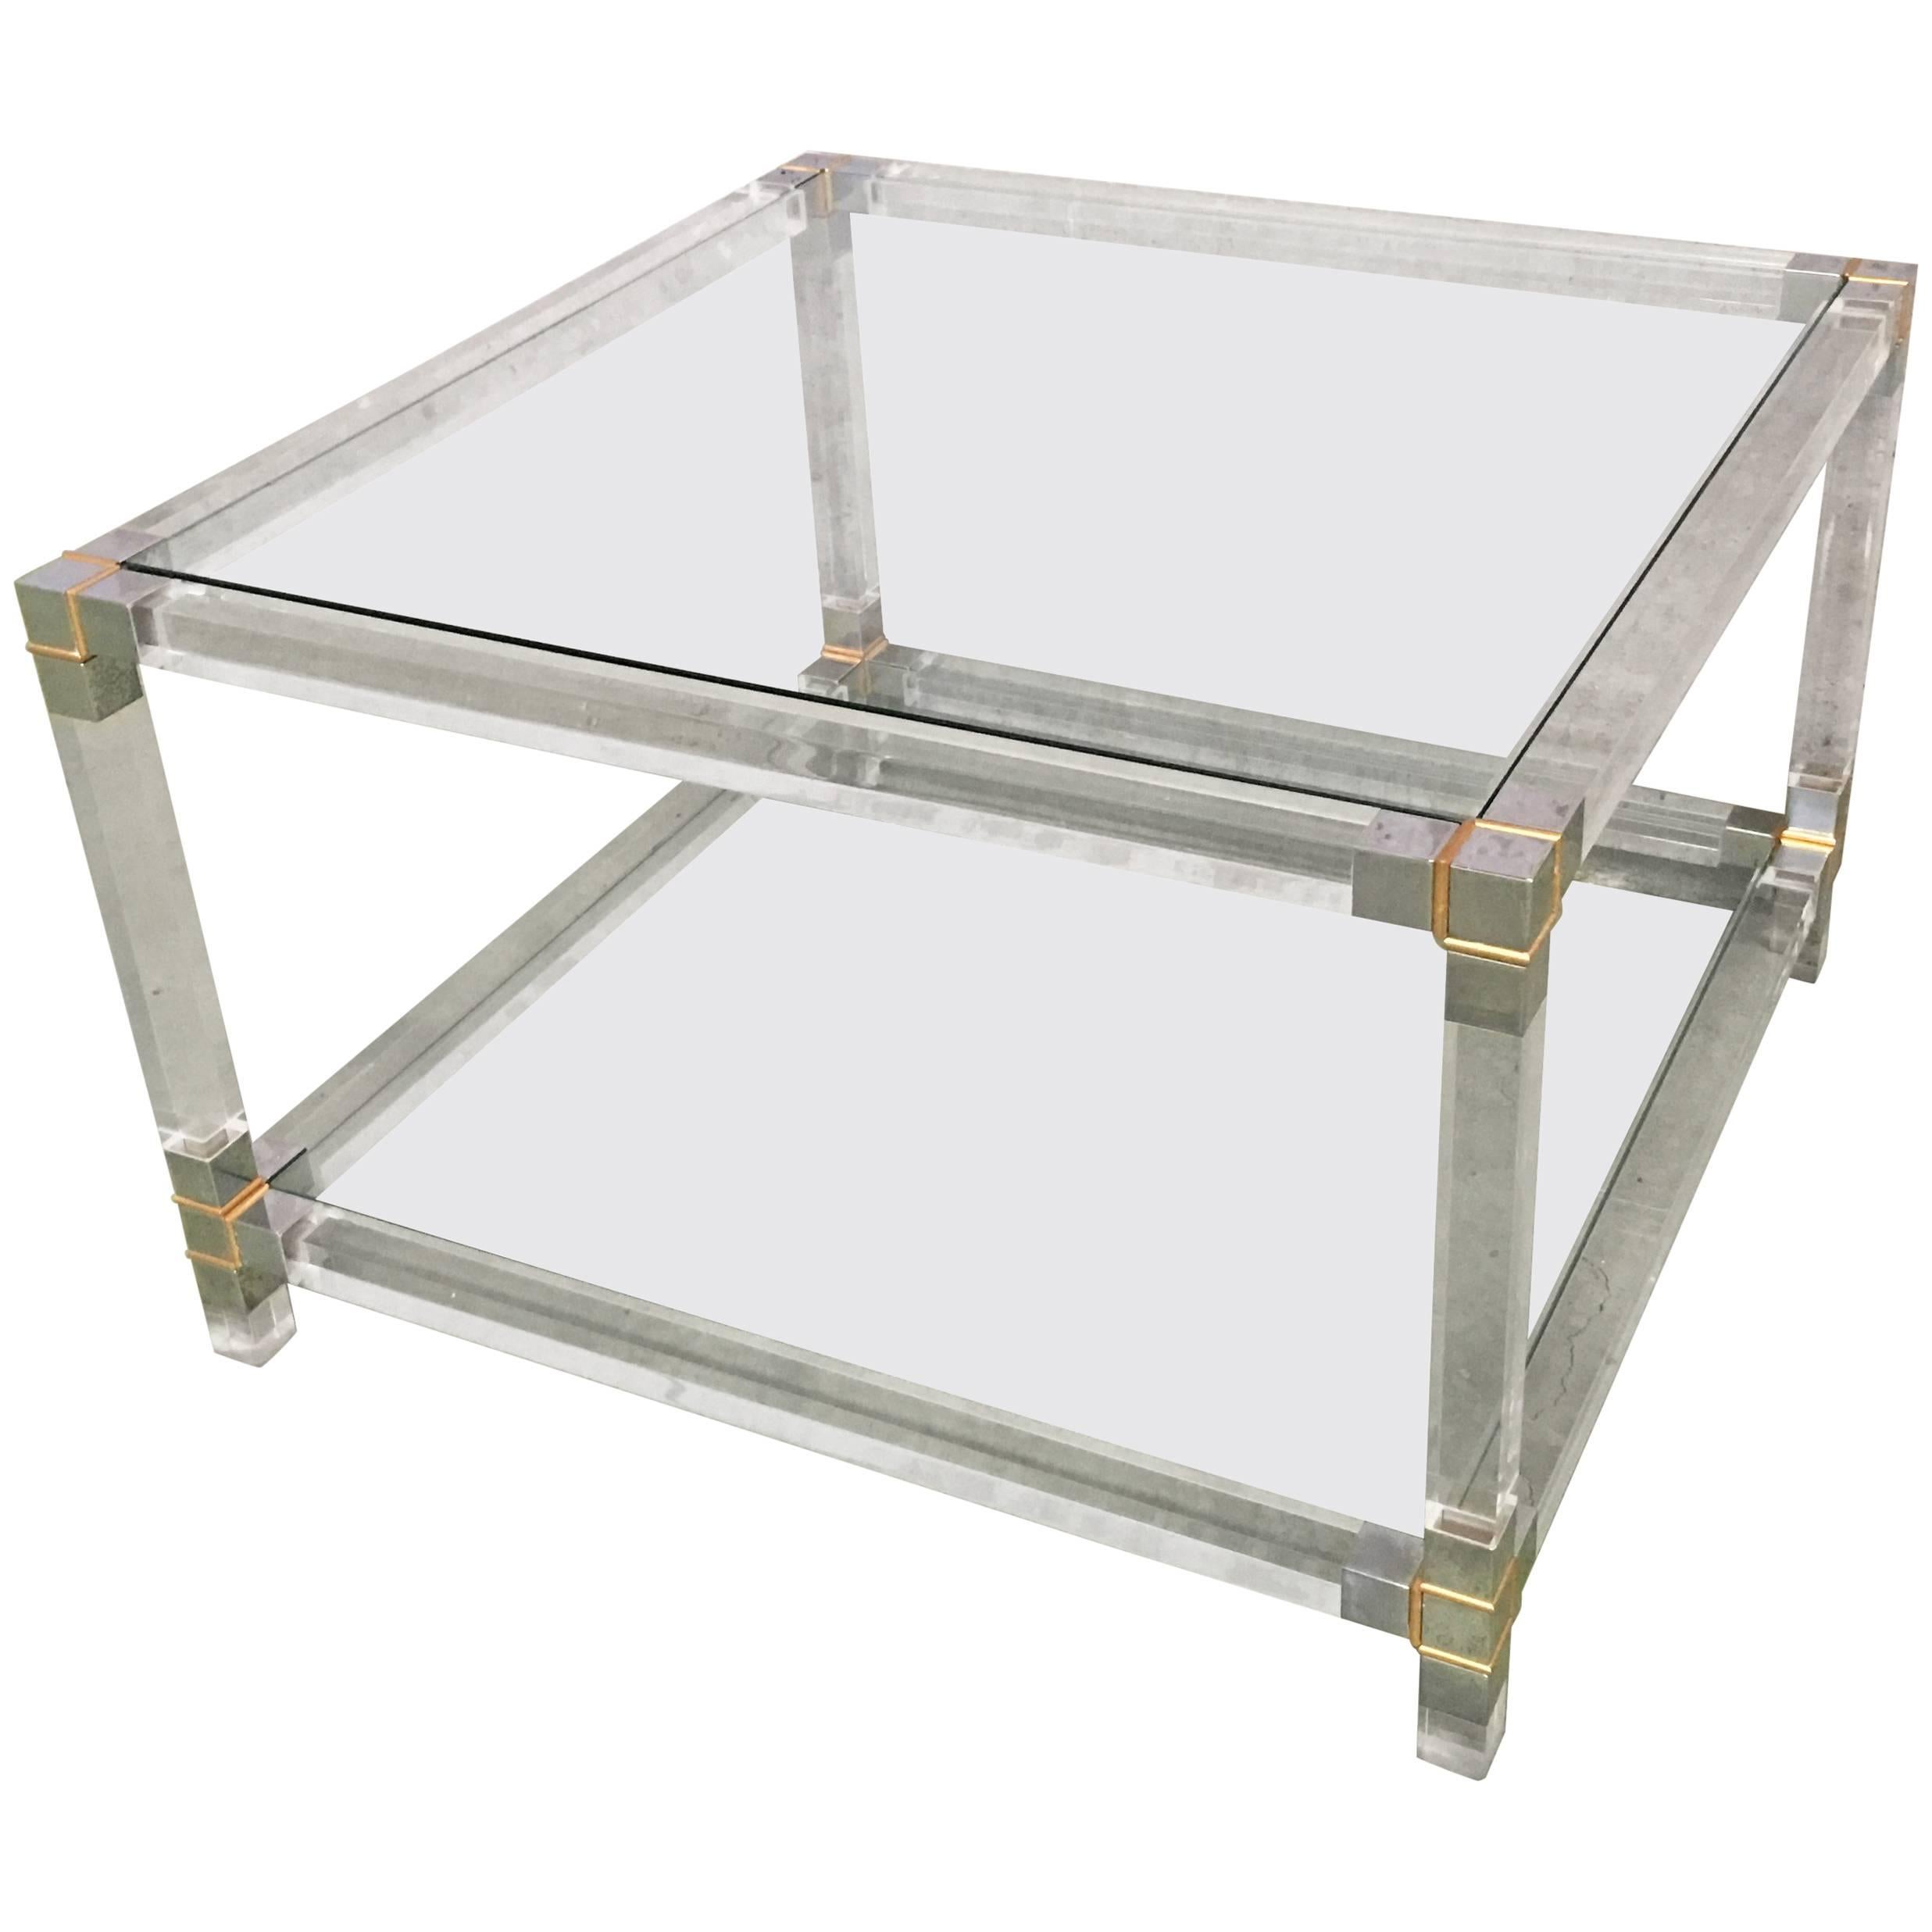 Midcentury Square Lucite Coffee Table with Chromed Metal Details